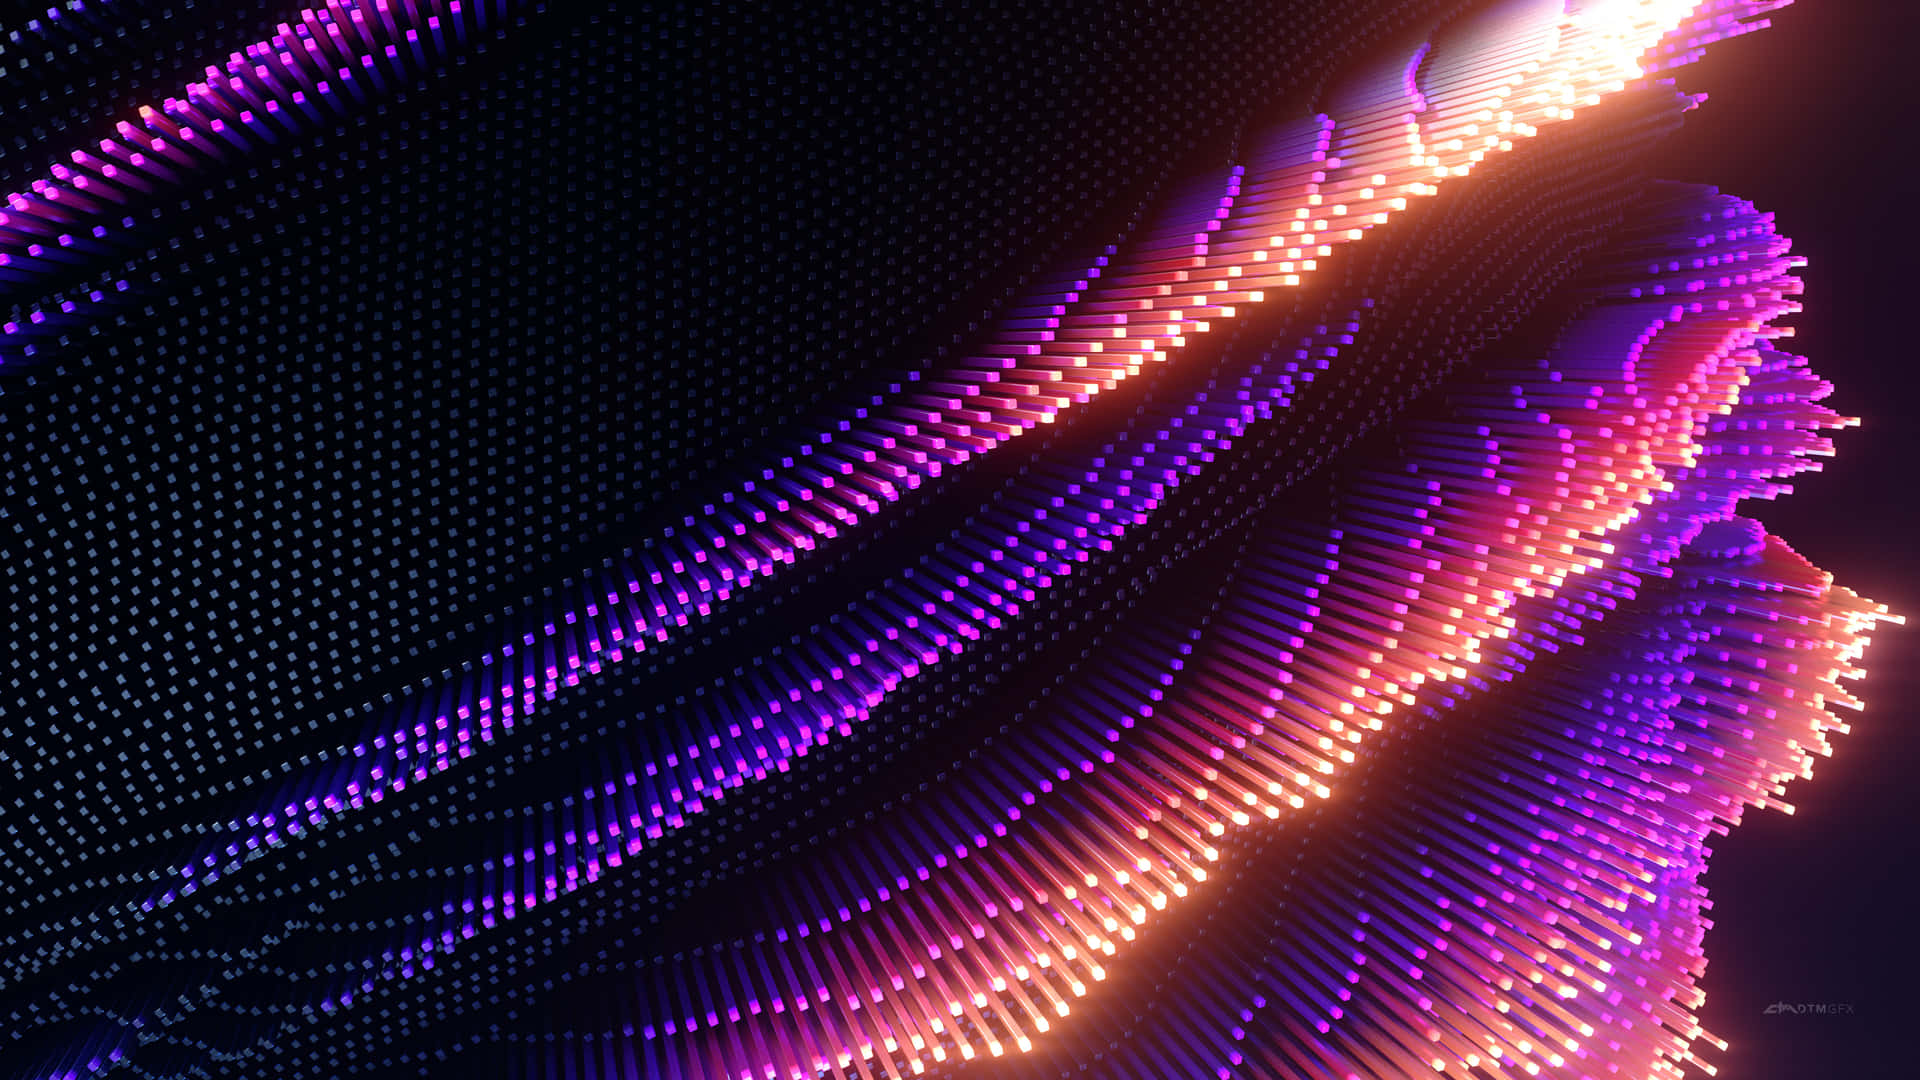 A Purple And Blue Abstract Pattern With Lights Wallpaper